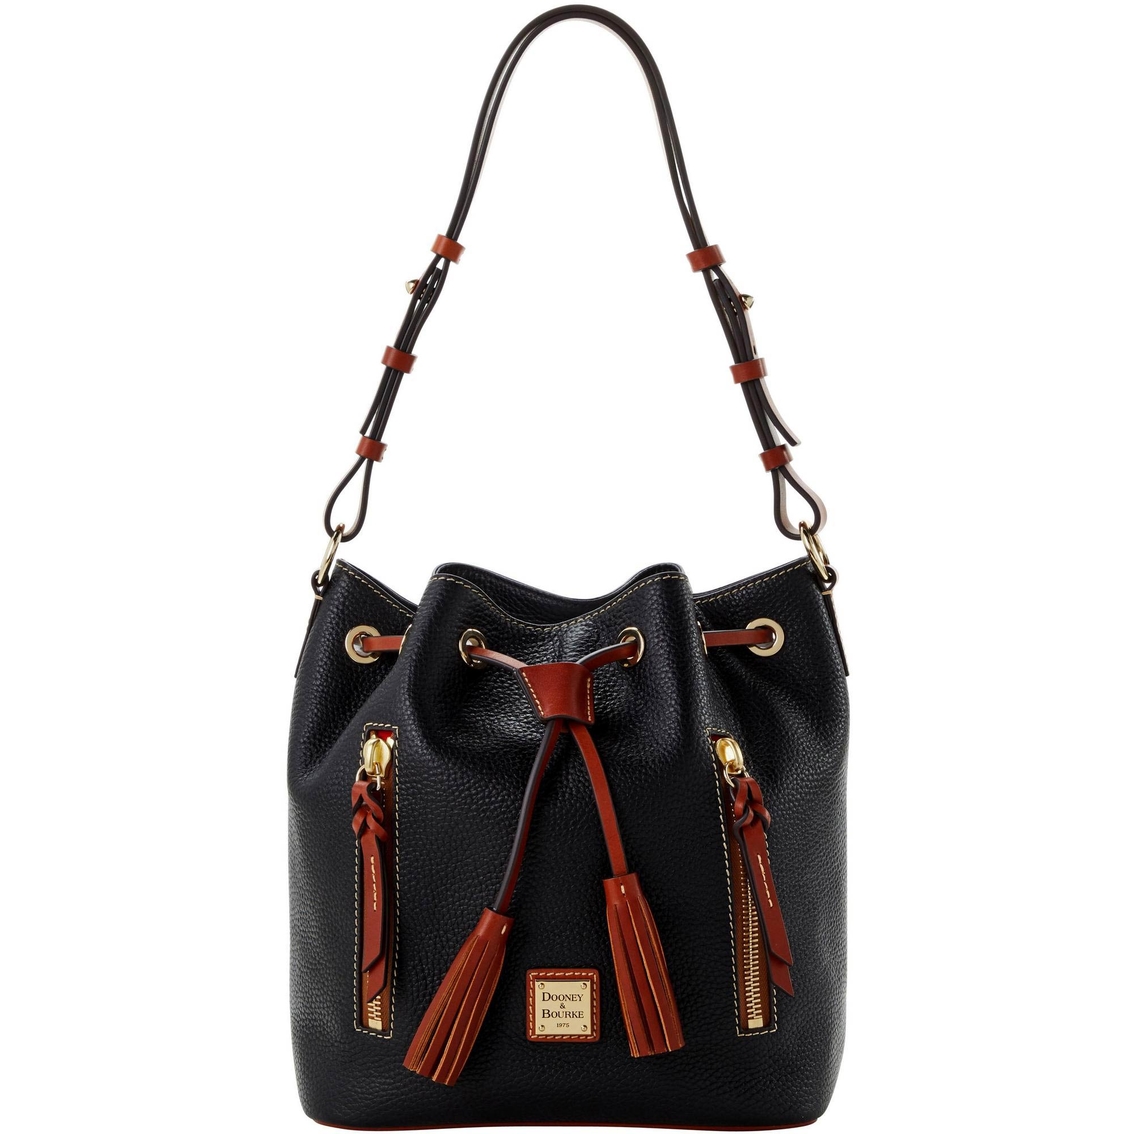 Dooney & Bourke Kendall Pebbled Leather Mini Drawstring Bag with